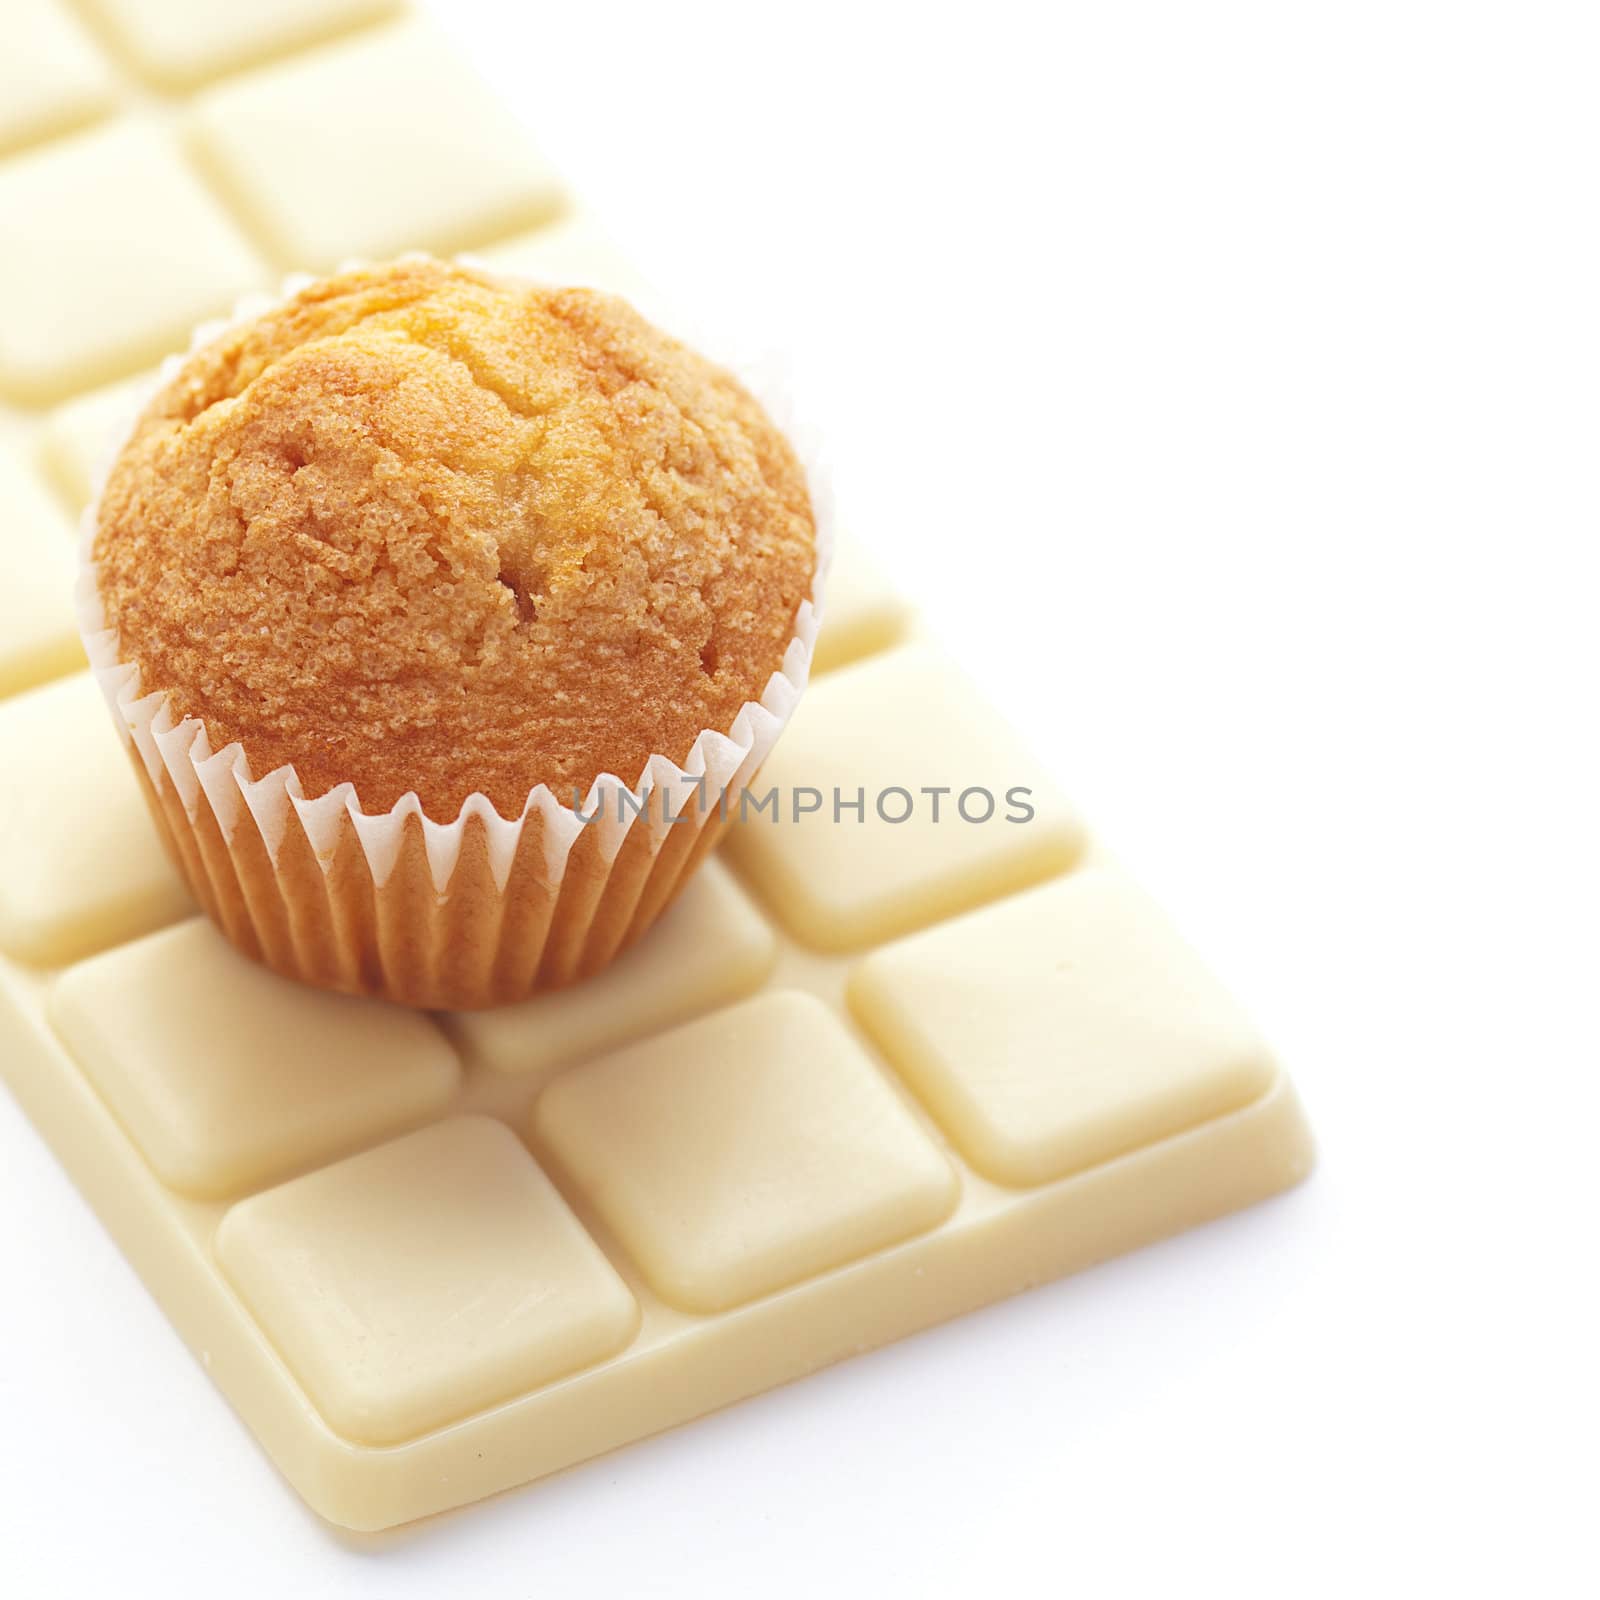 bar of white chocolate and muffin isolated on white